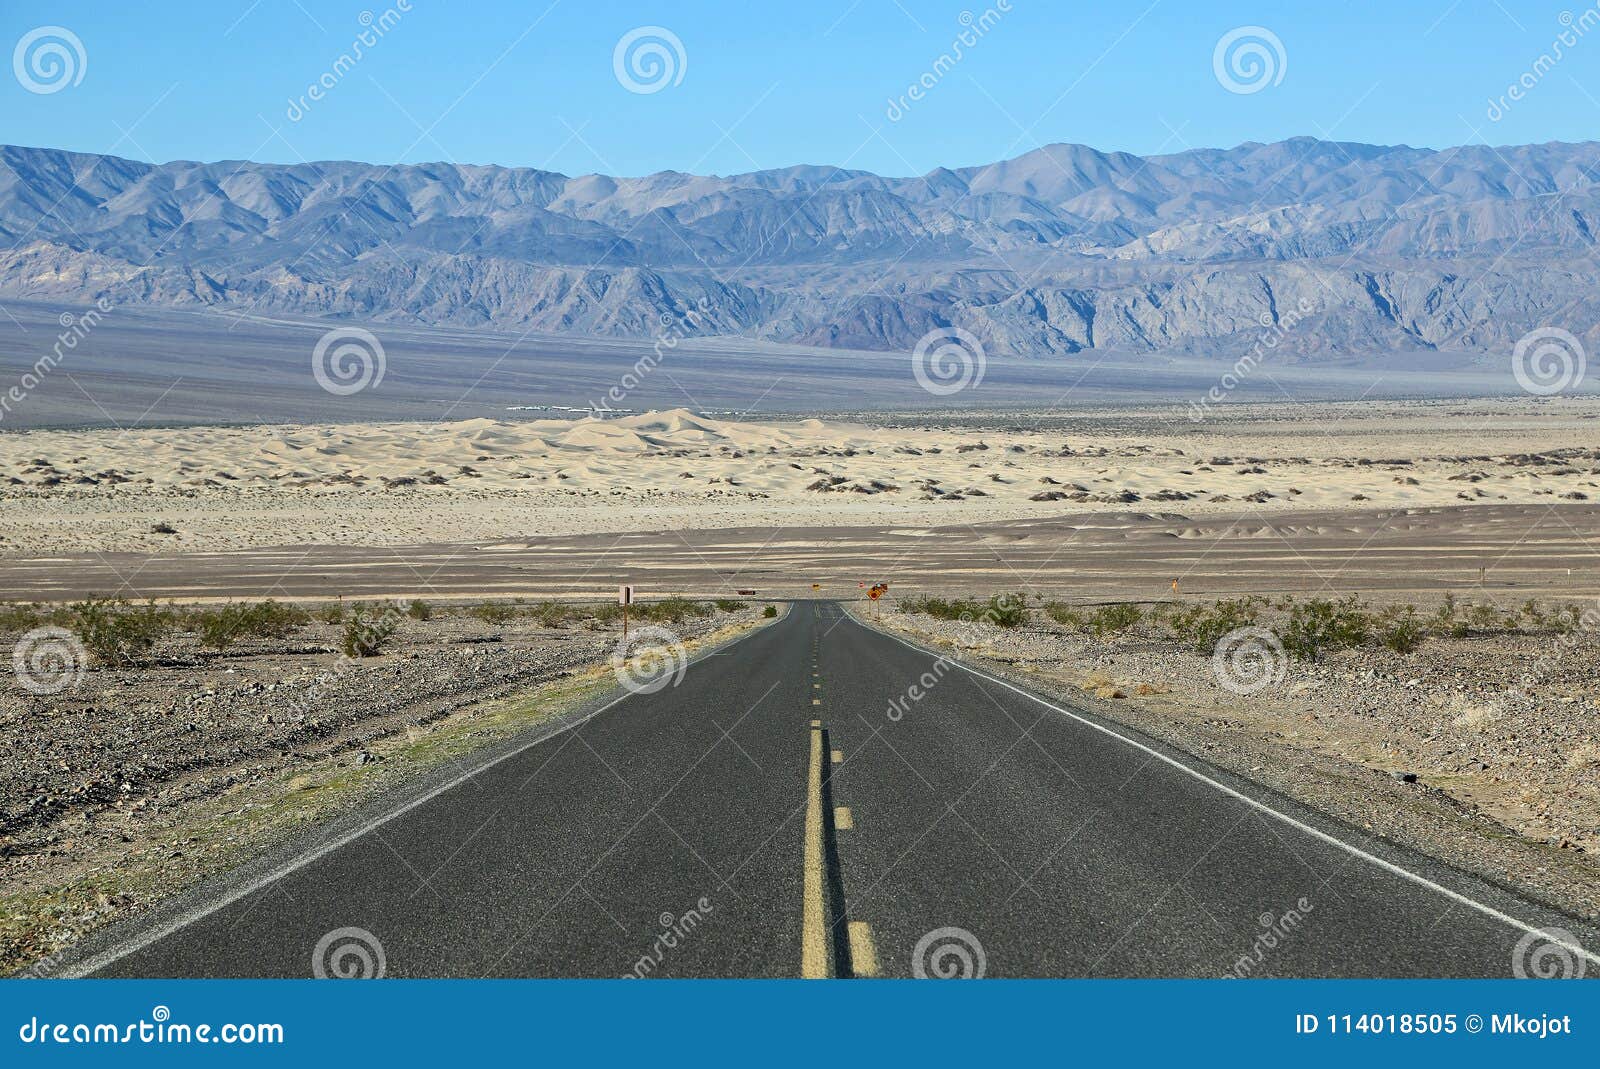 The Road and Mesquite Flat Sand Dunes Stock Image - Image of mountain ...